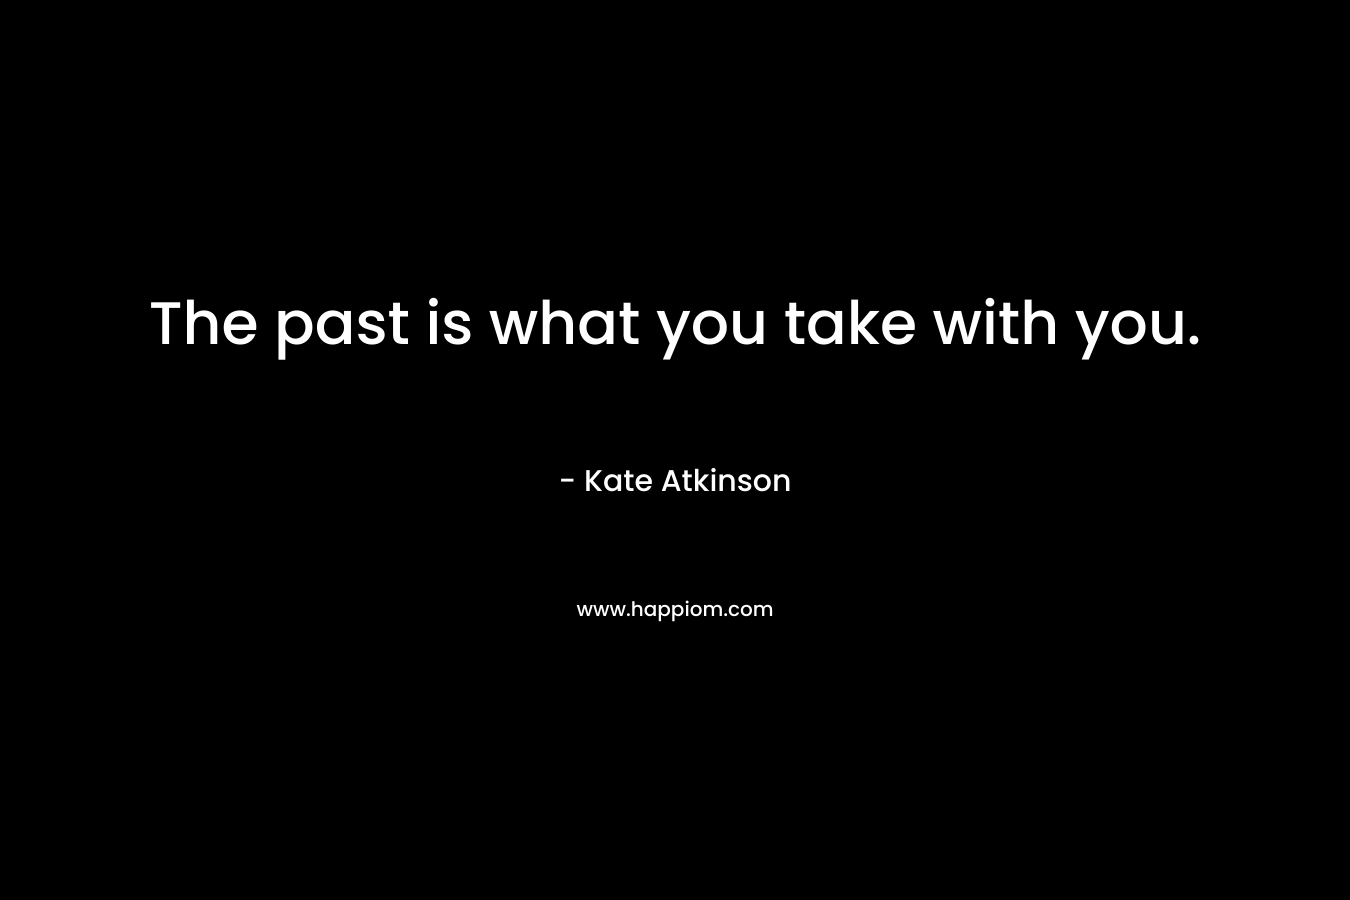 The past is what you take with you.